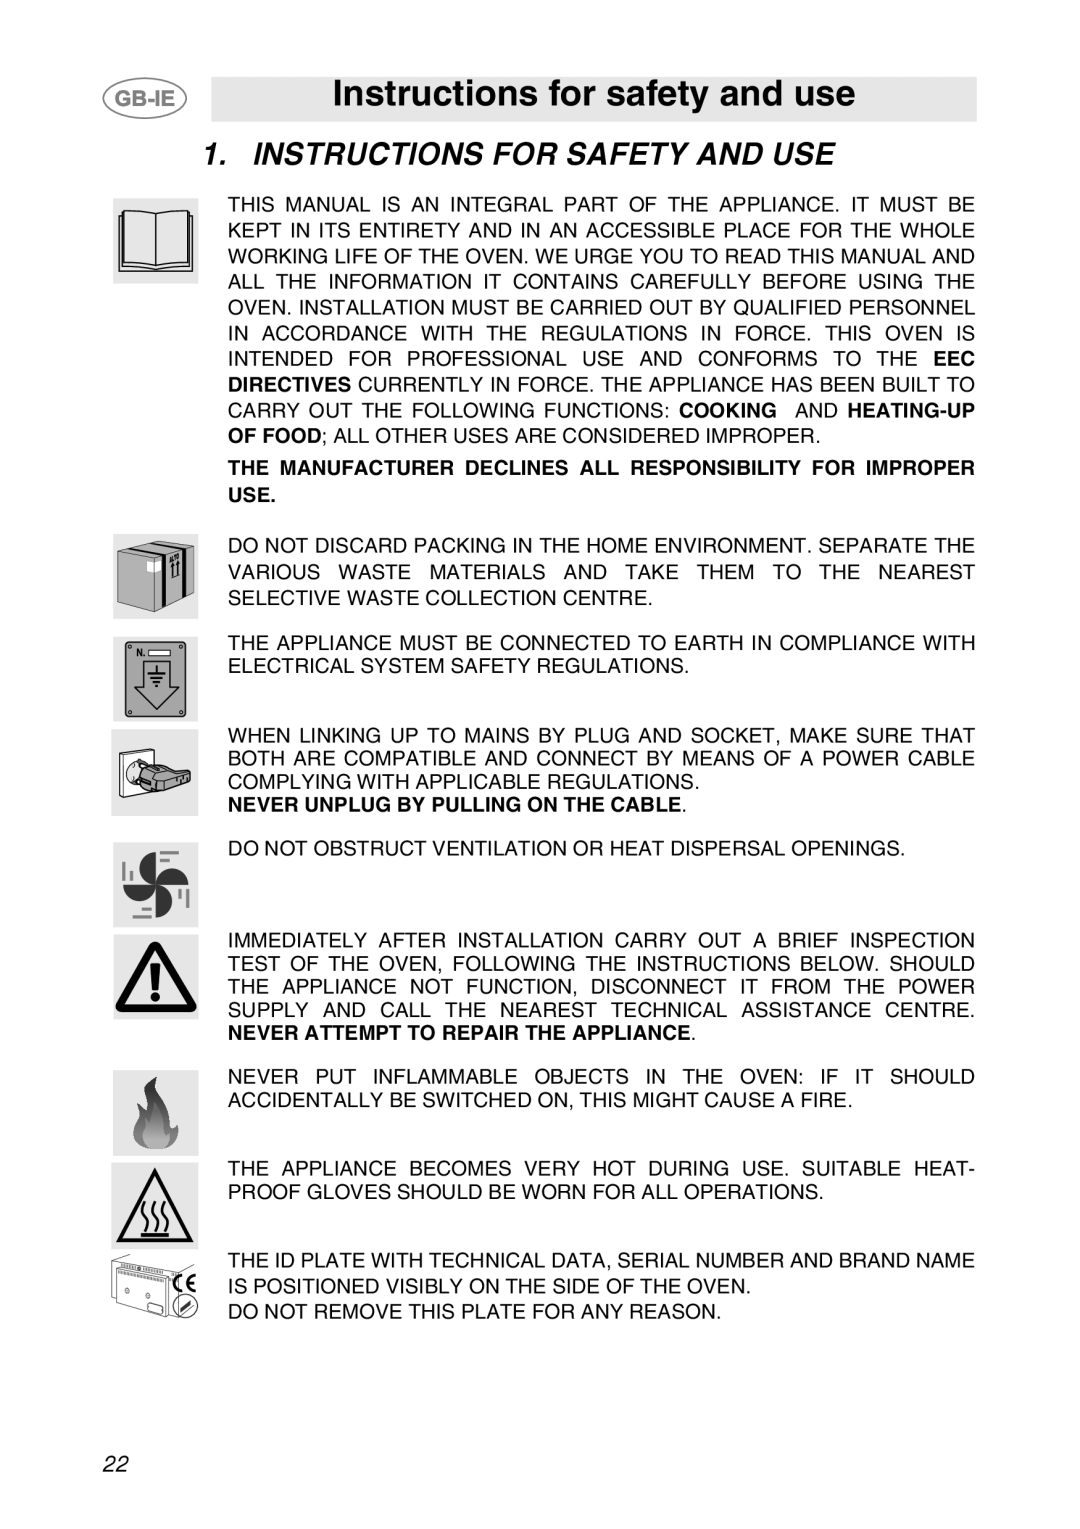 Smeg ALFA141XE Instructions for safety and use, Instructions For Safety And Use, Never Unplug By Pulling On The Cable 